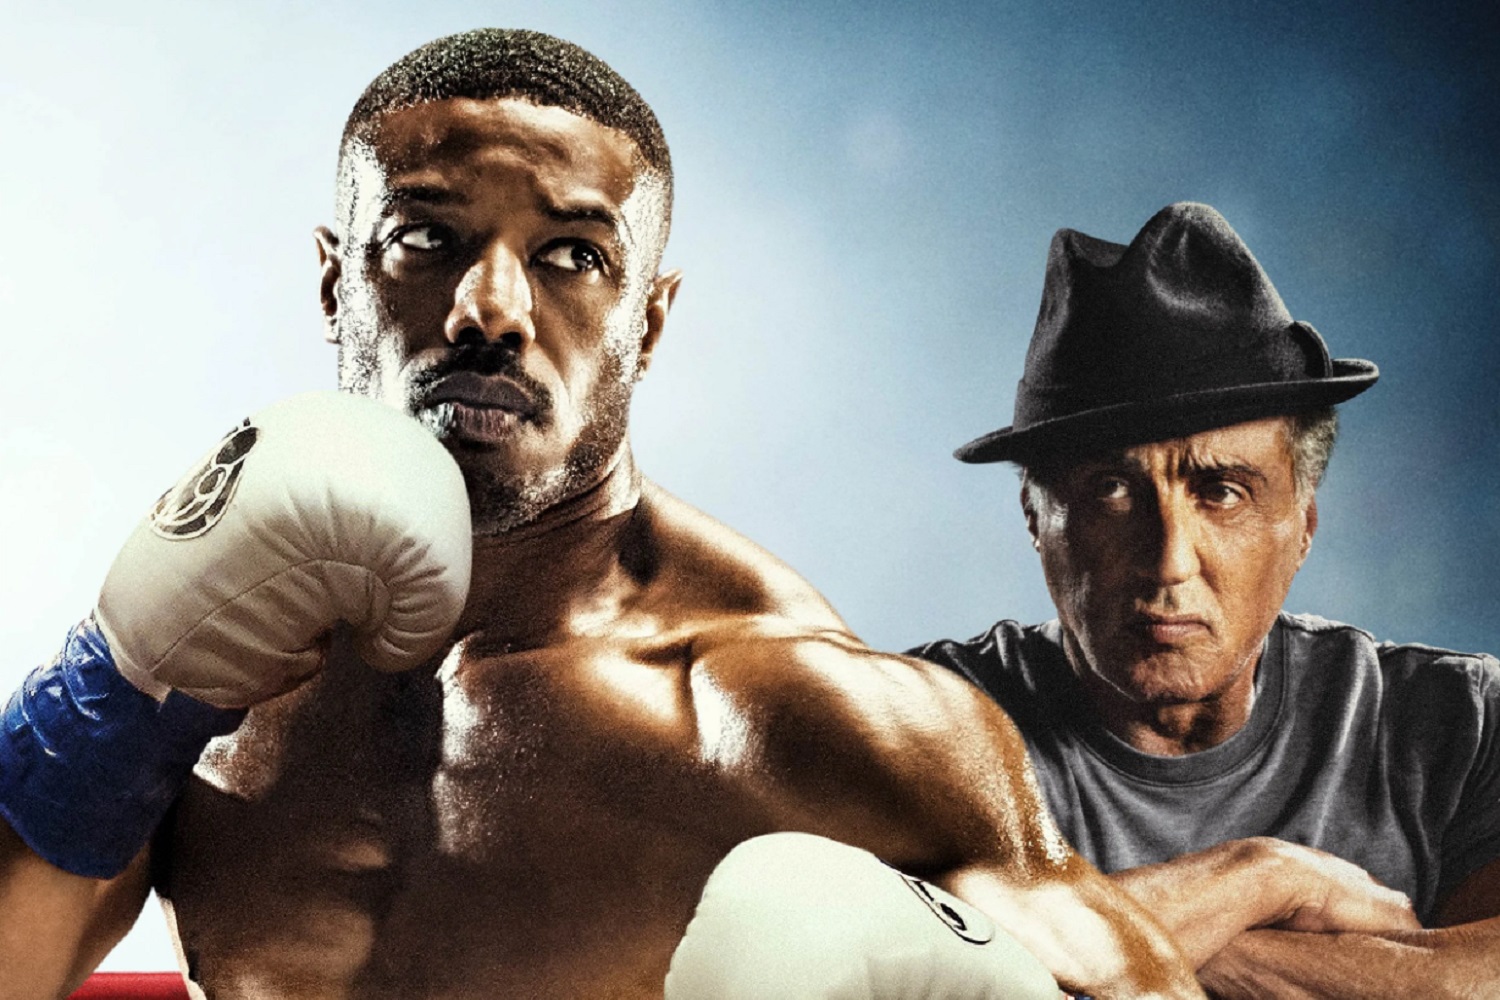 Why Is Sylvester Stallone Not In ‘Creed III’? The Behind-The-Scenes Feud